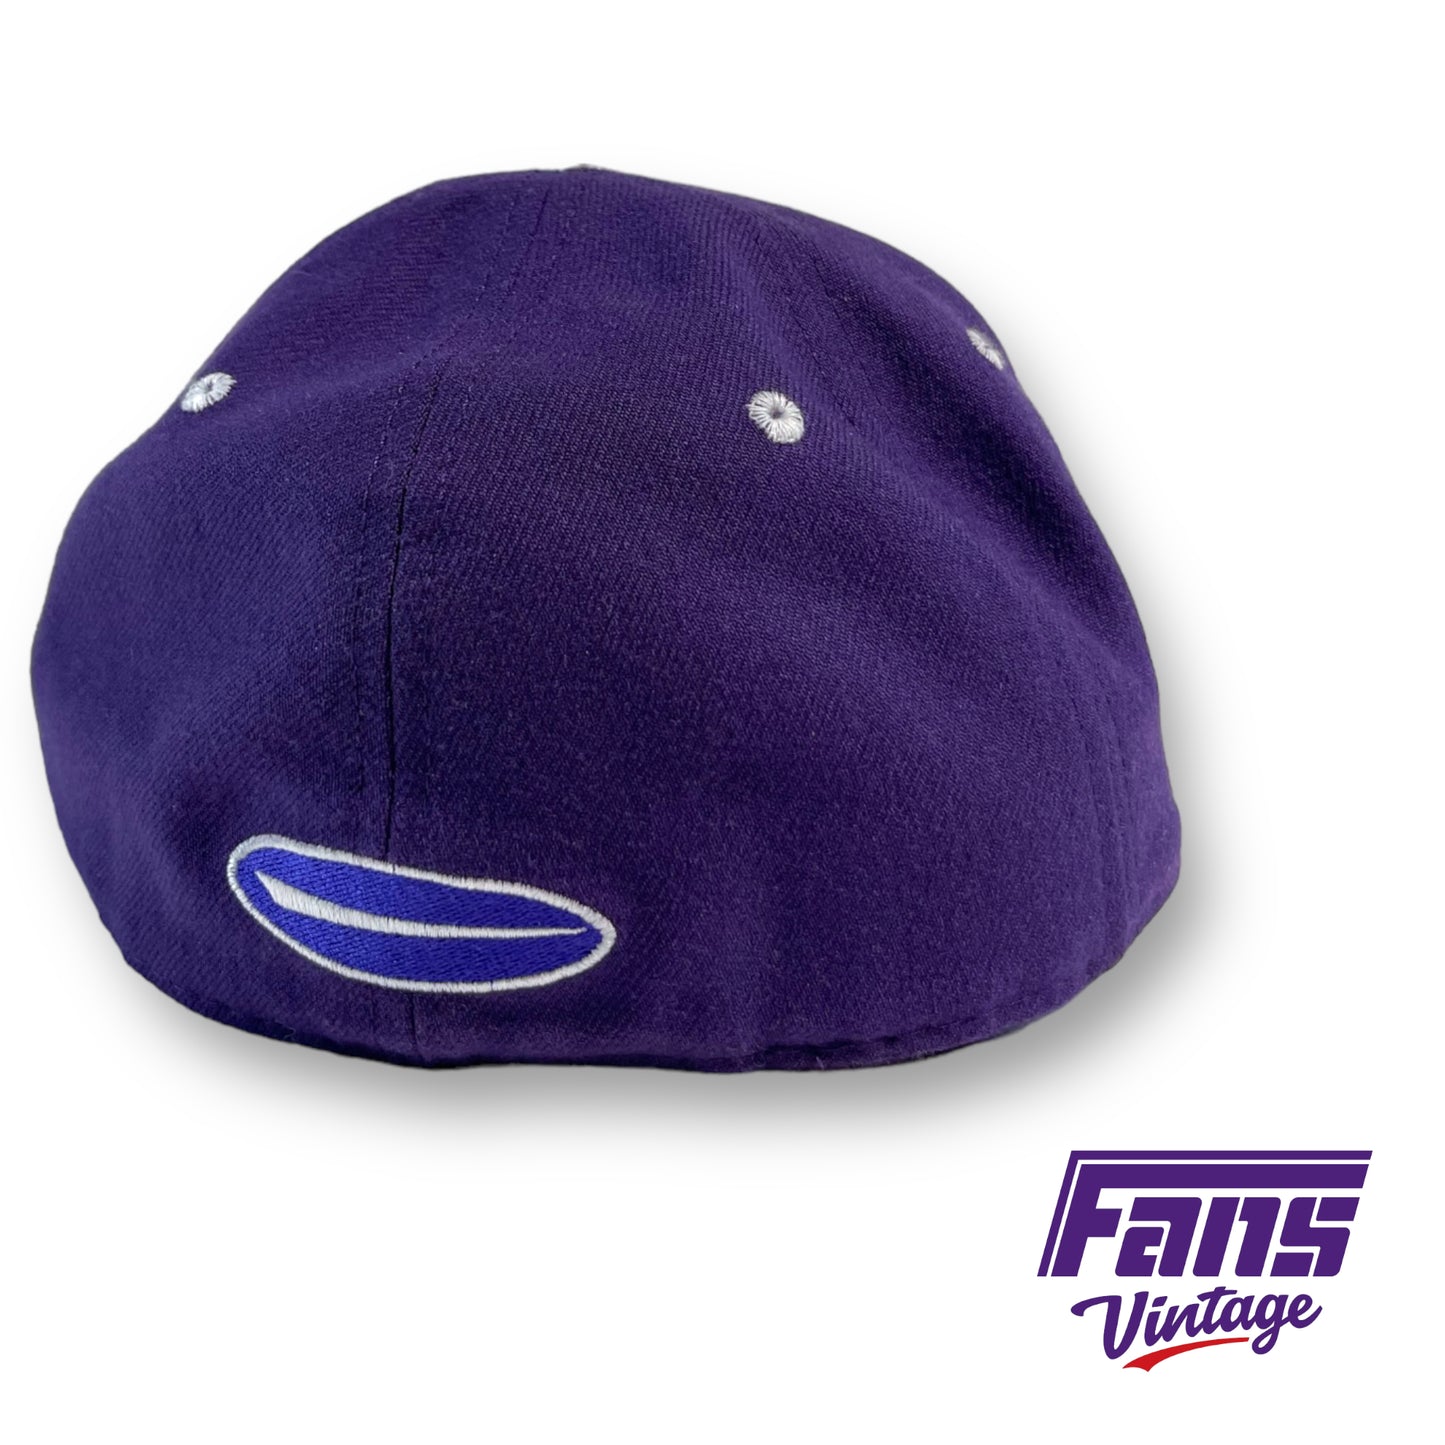 2000s TCU game worn fitted hat